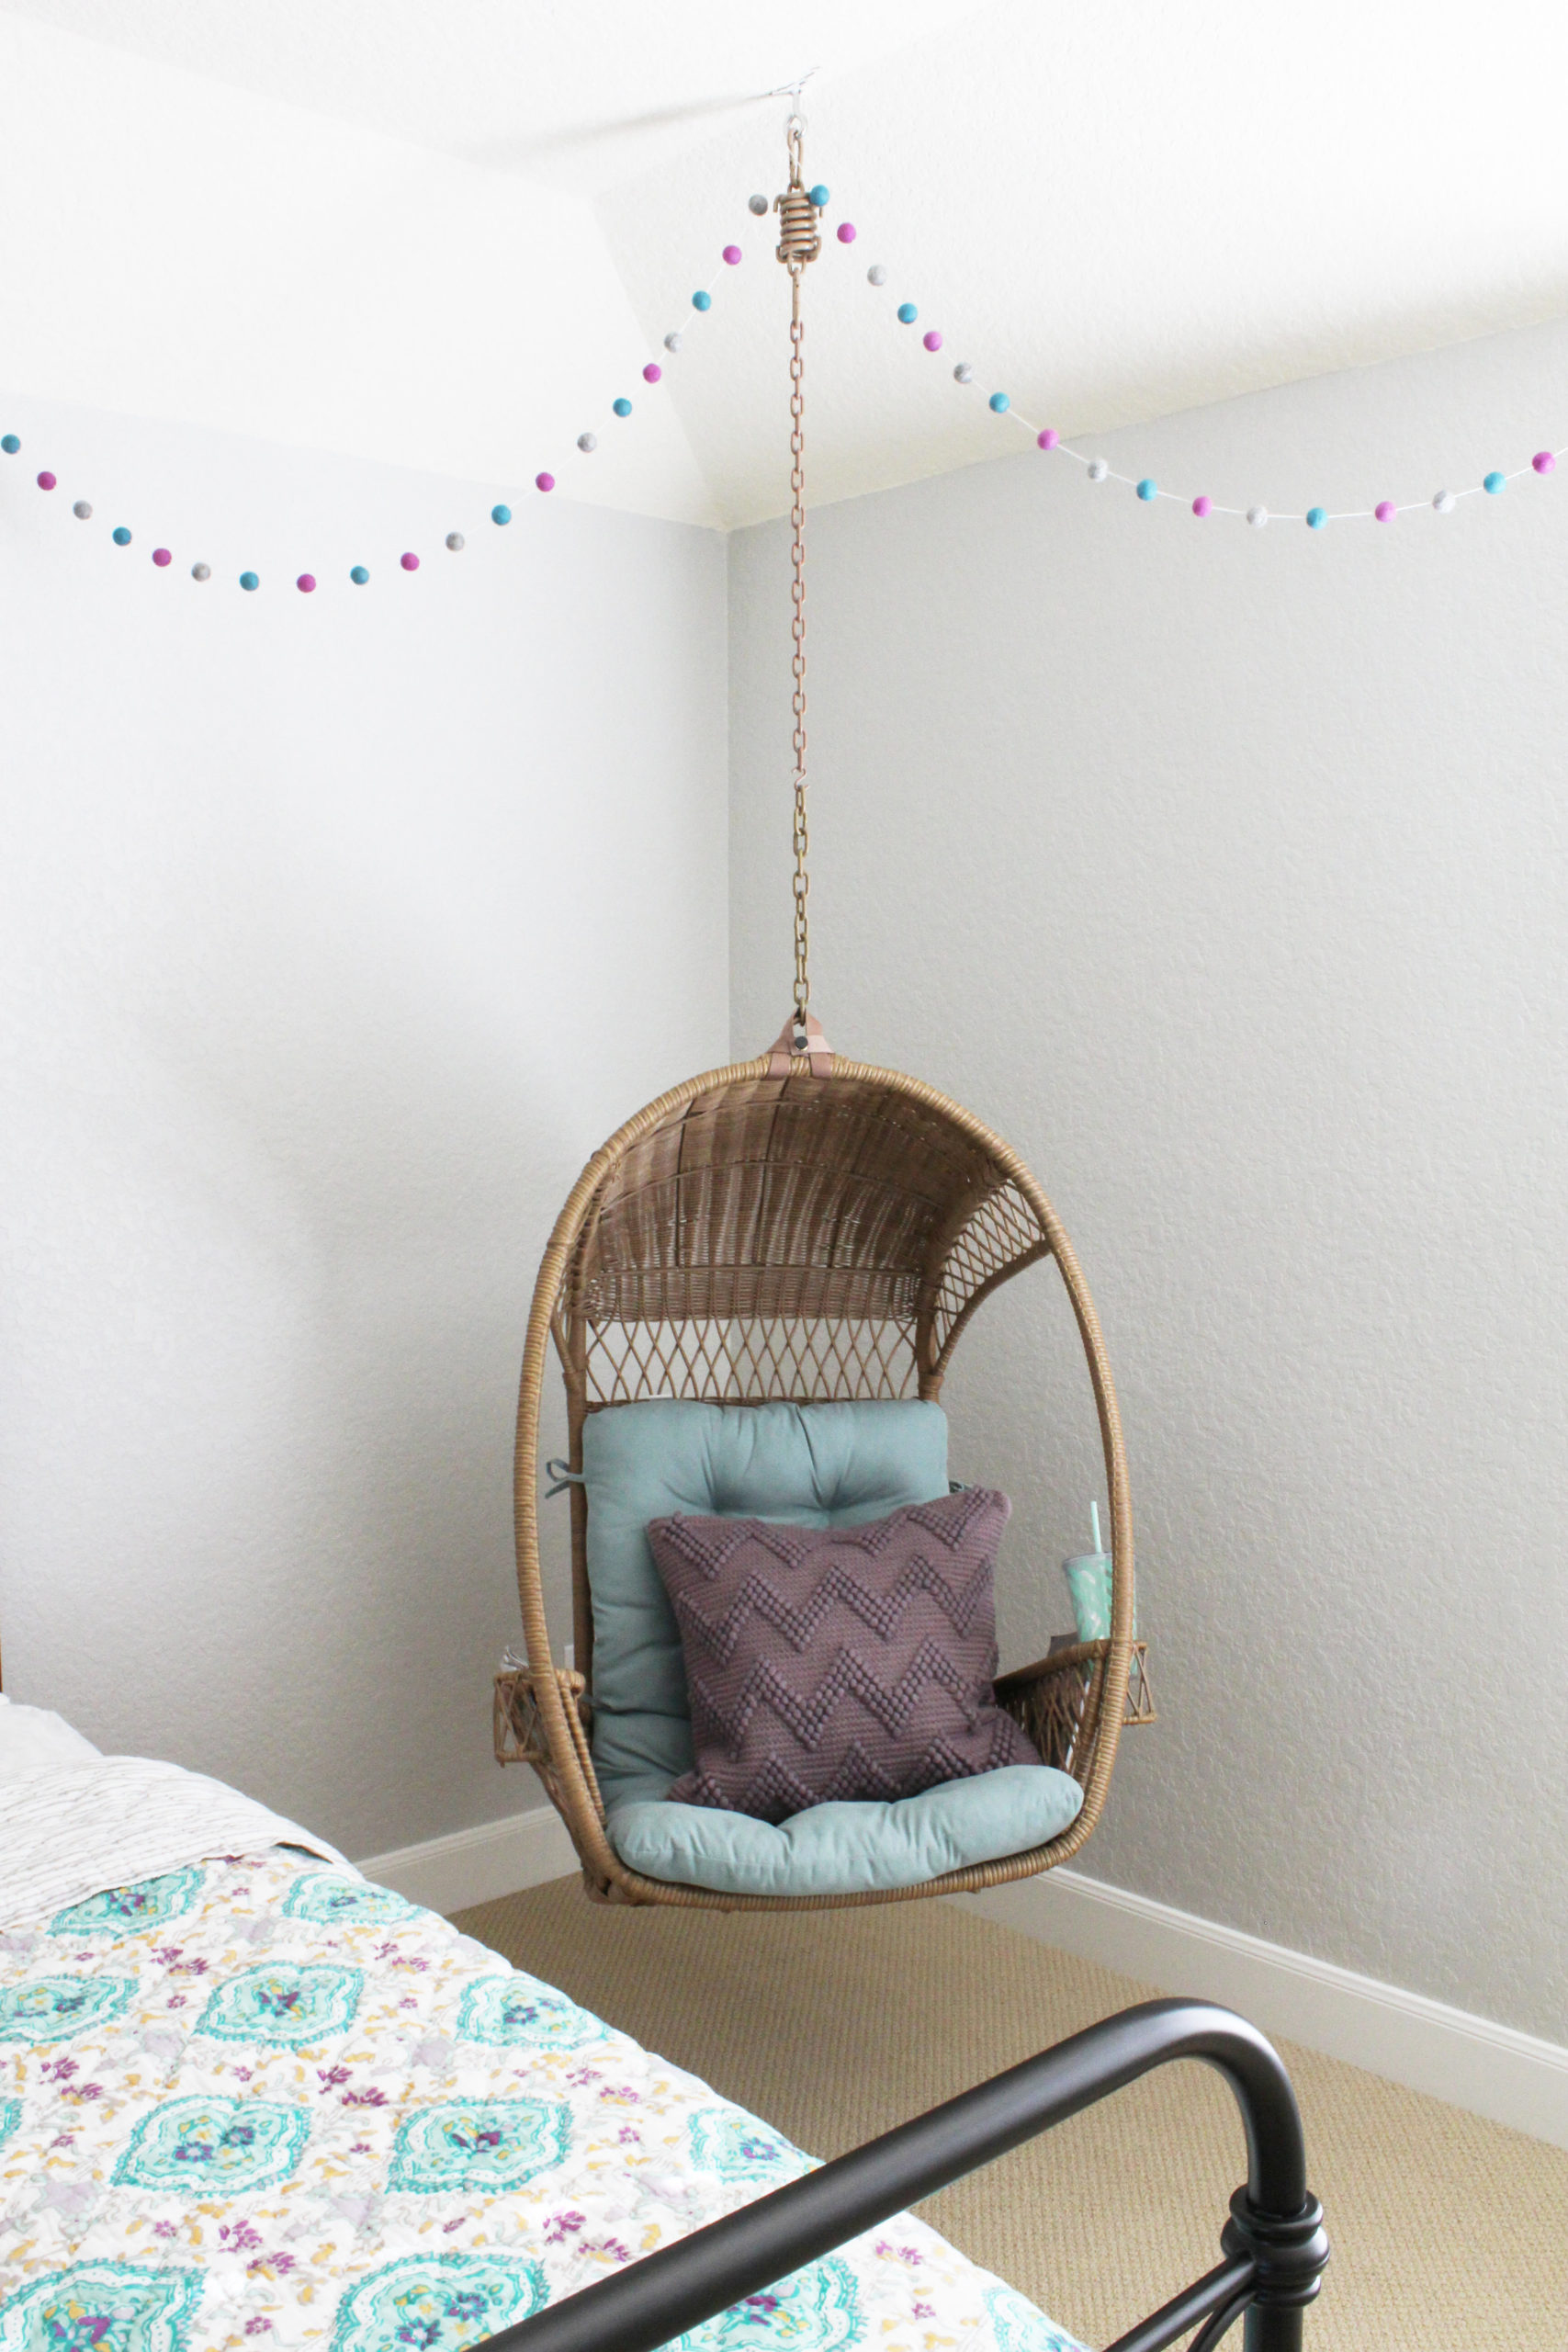 Girls Room with hanging chair by Renee Yee Interiors